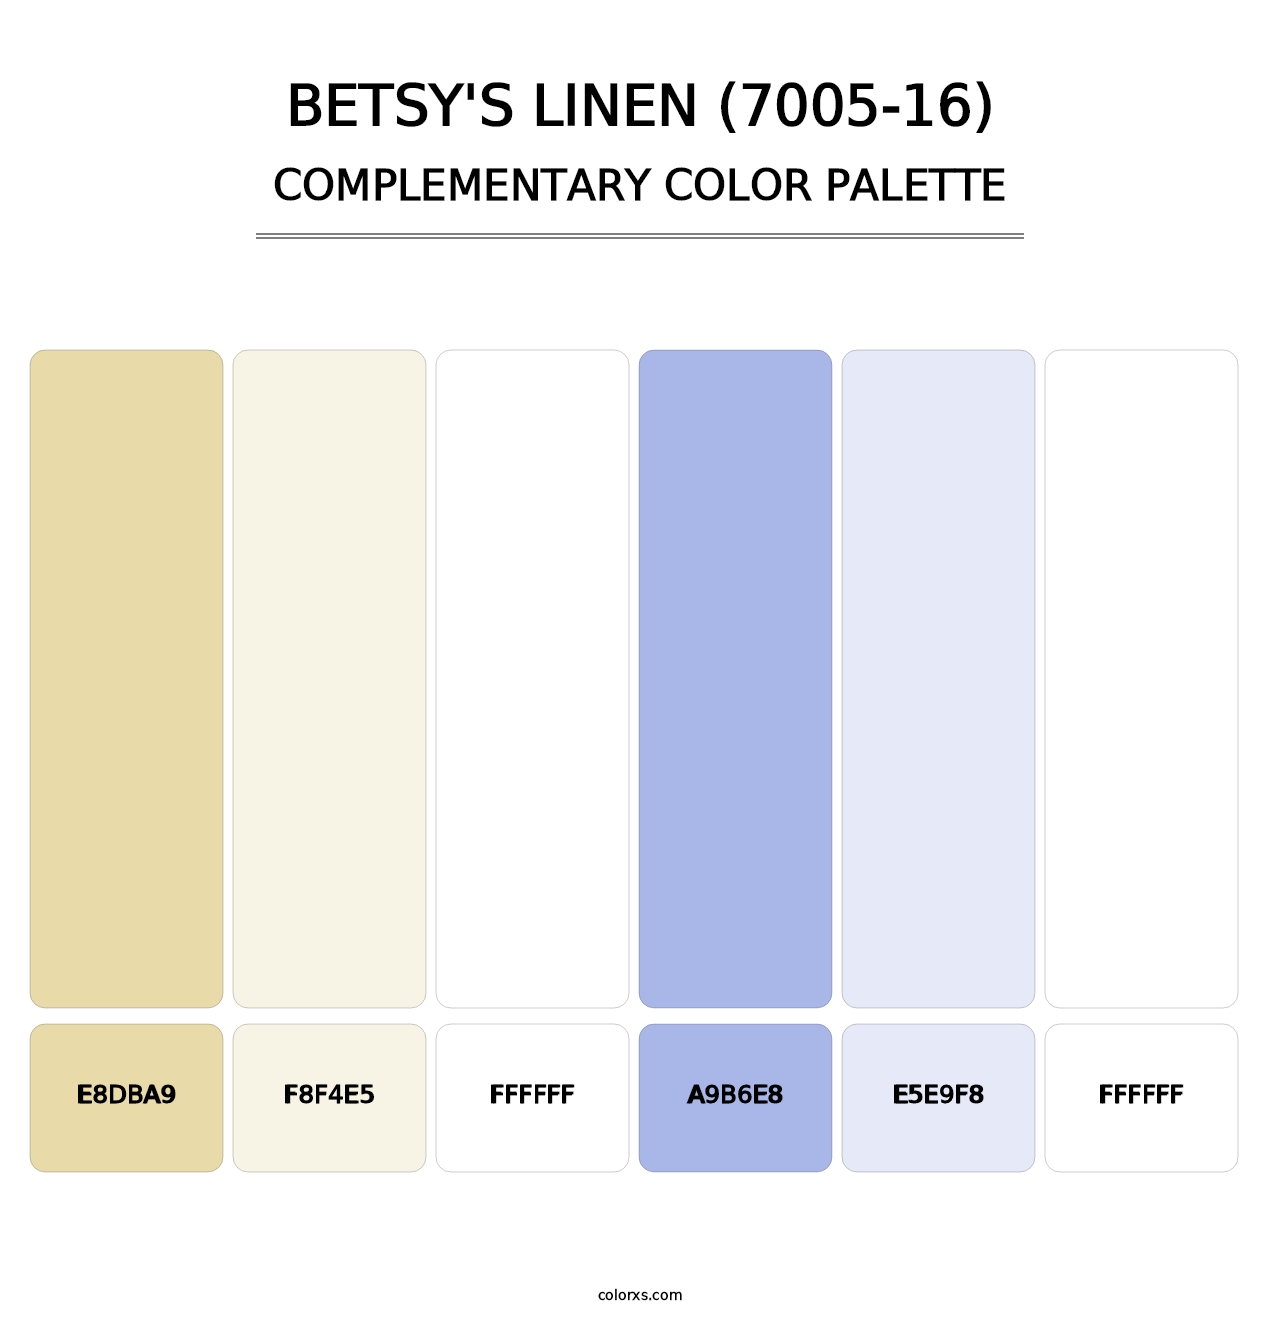 Betsy's Linen (7005-16) - Complementary Color Palette